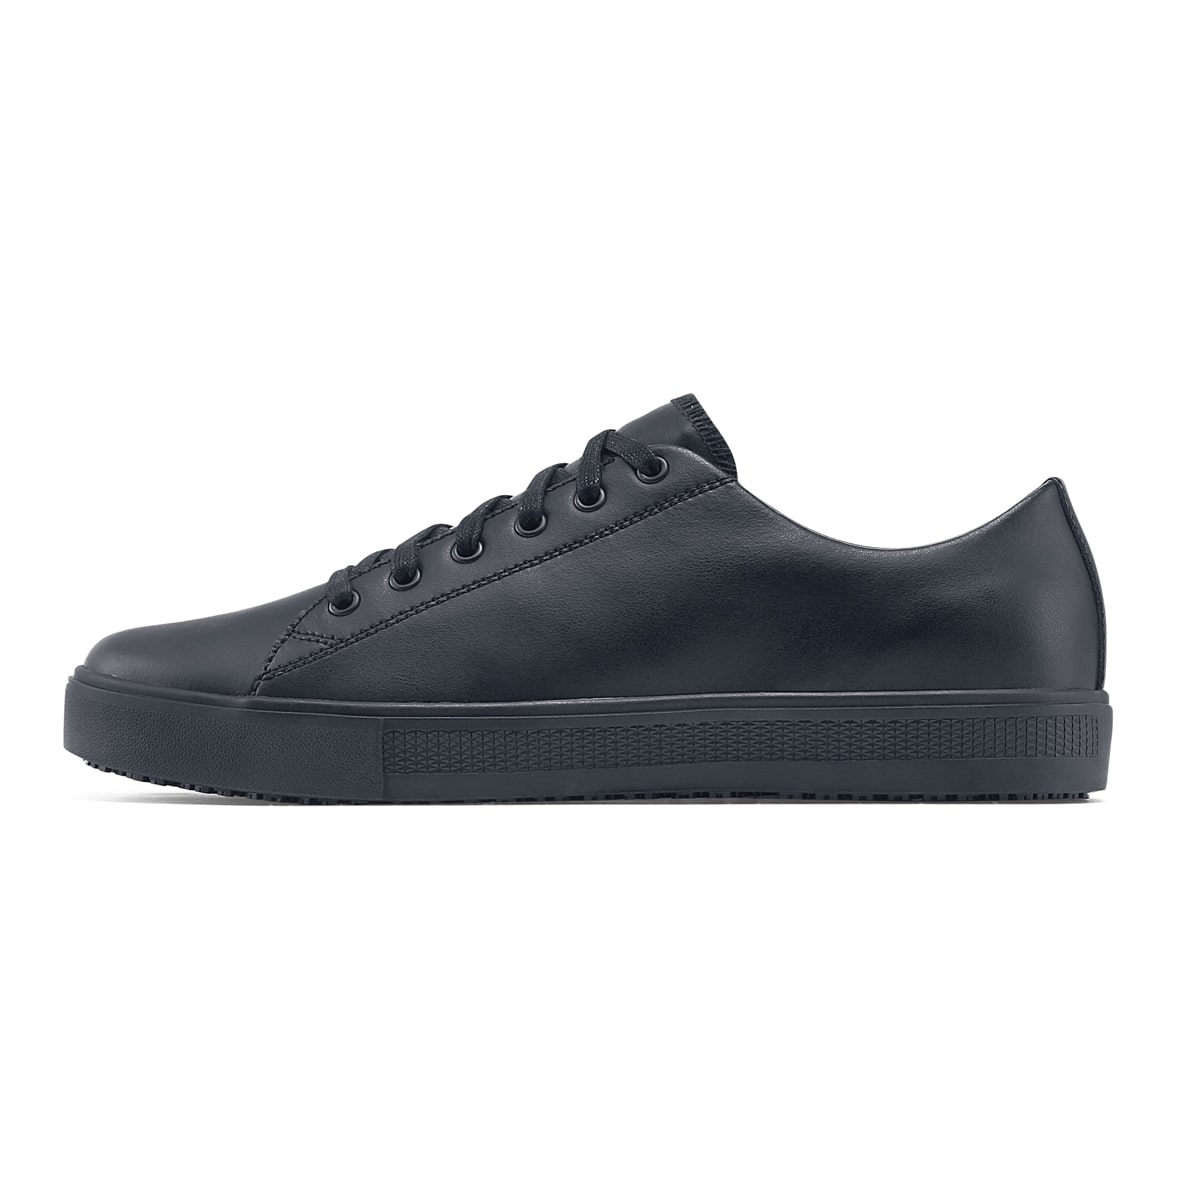 The Old School Low-Rider from Shoes For Crews is an slip-resistant lace-up shoe designed to provide comfort throughout the day, seen from the left.